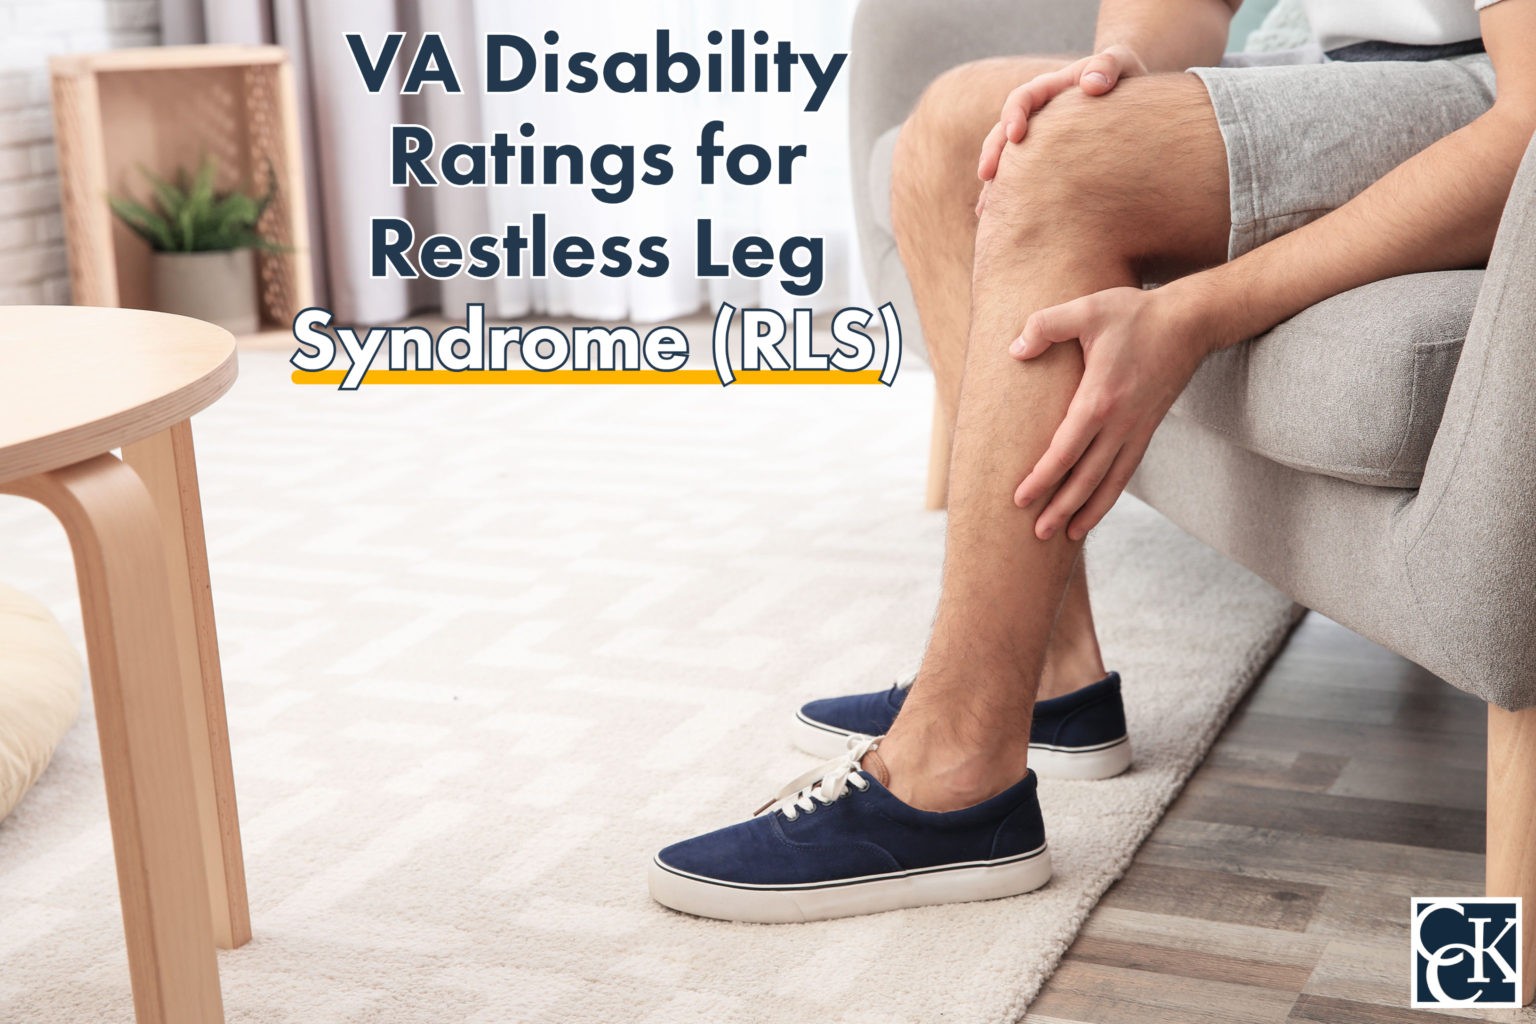 Va Disability Ratings For Restless Leg Syndrome Rls Cck Law 